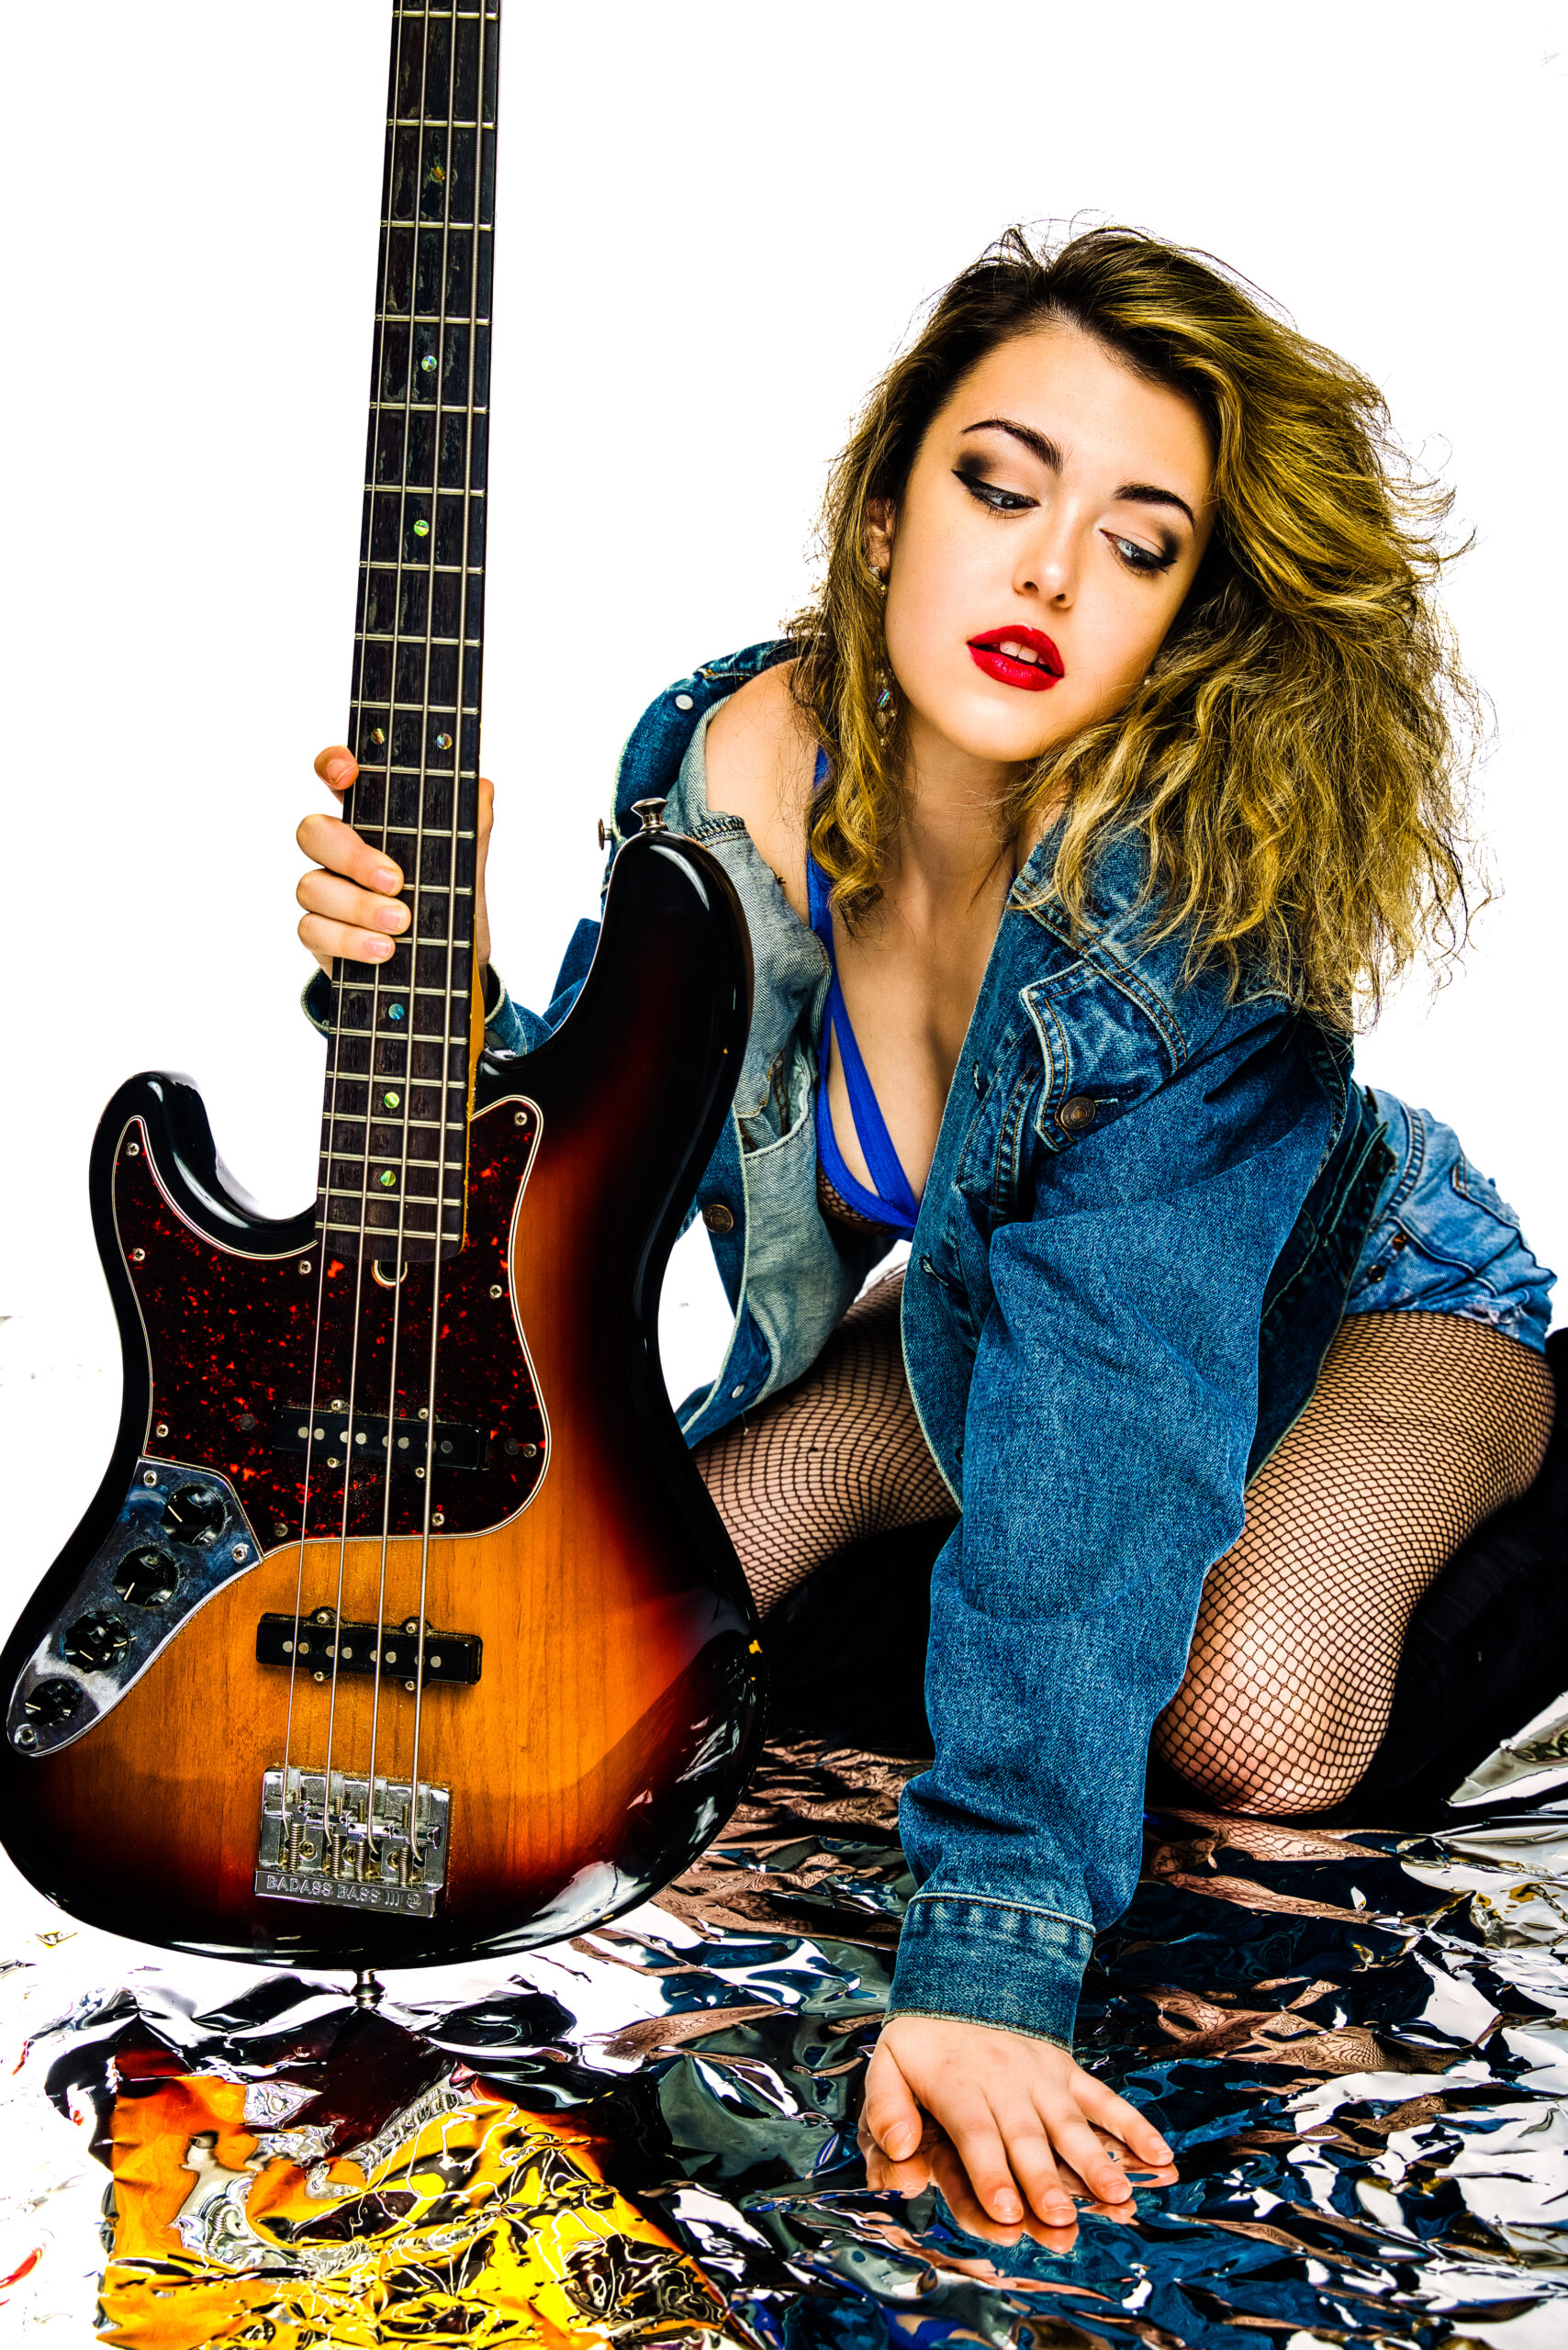 #GuitarGirl – Jordyn Krenkel | “My Fender Telecaster is my go-to, and I pair it with a Fender Champion amp.”